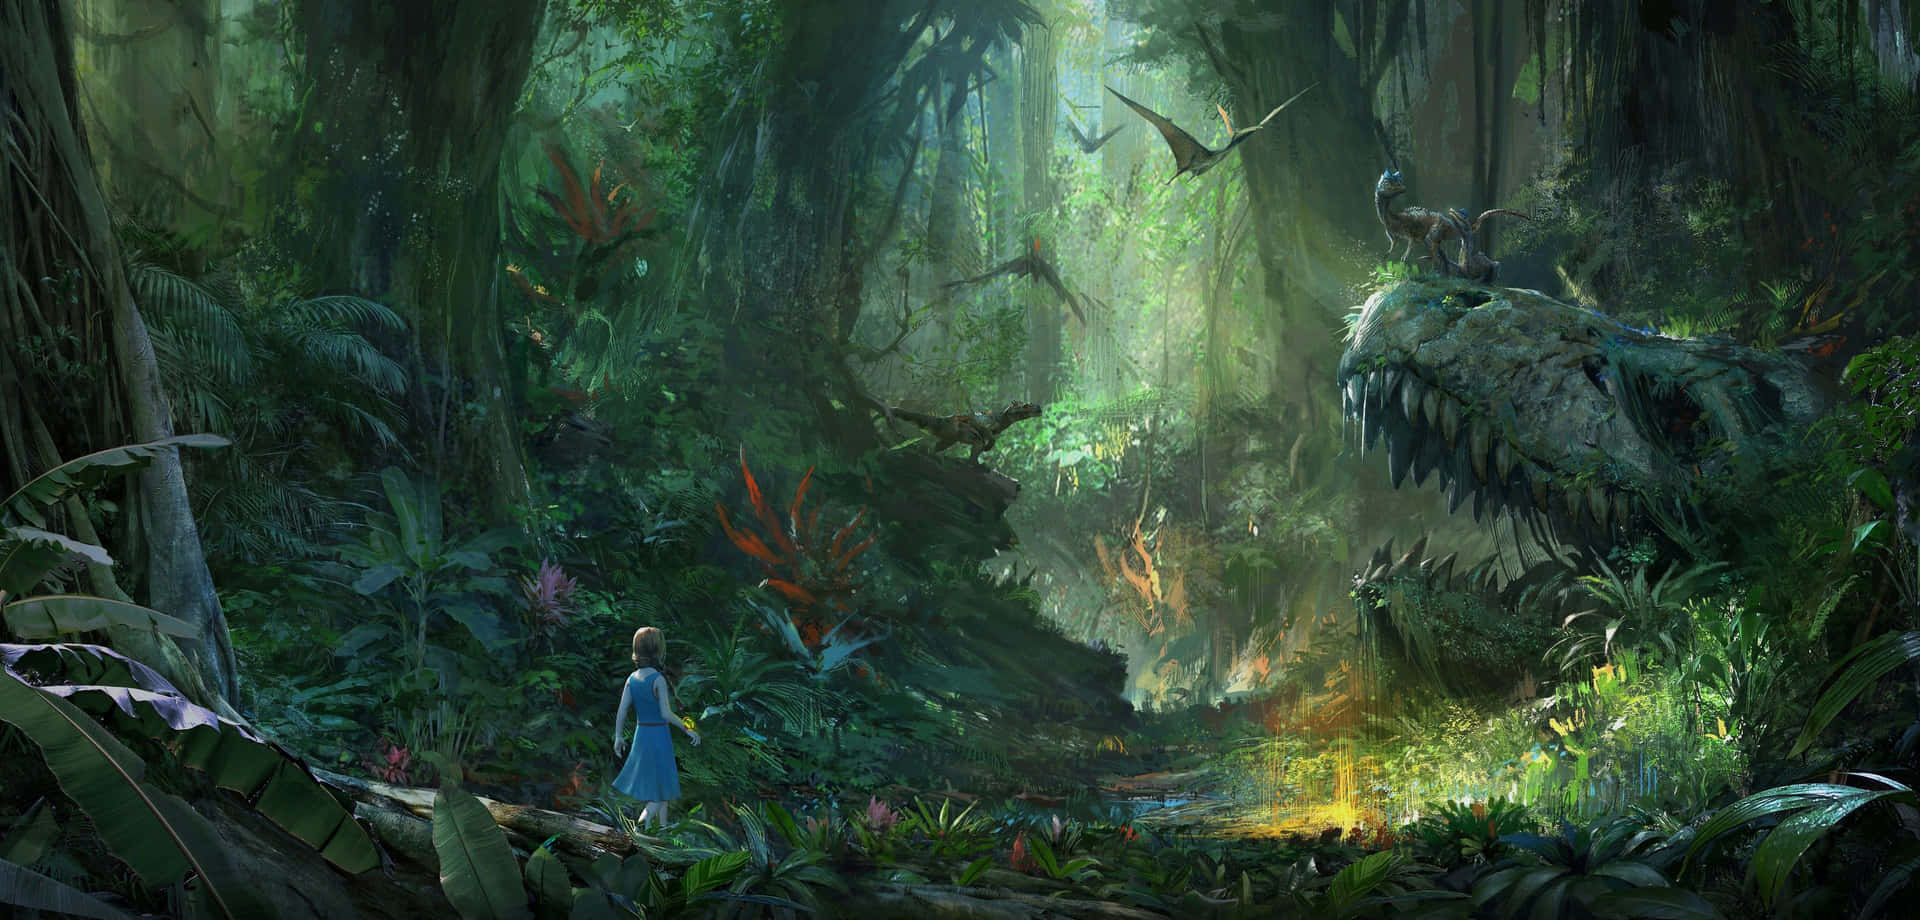 A Girl Is Walking Through A Jungle With Dinosaurs